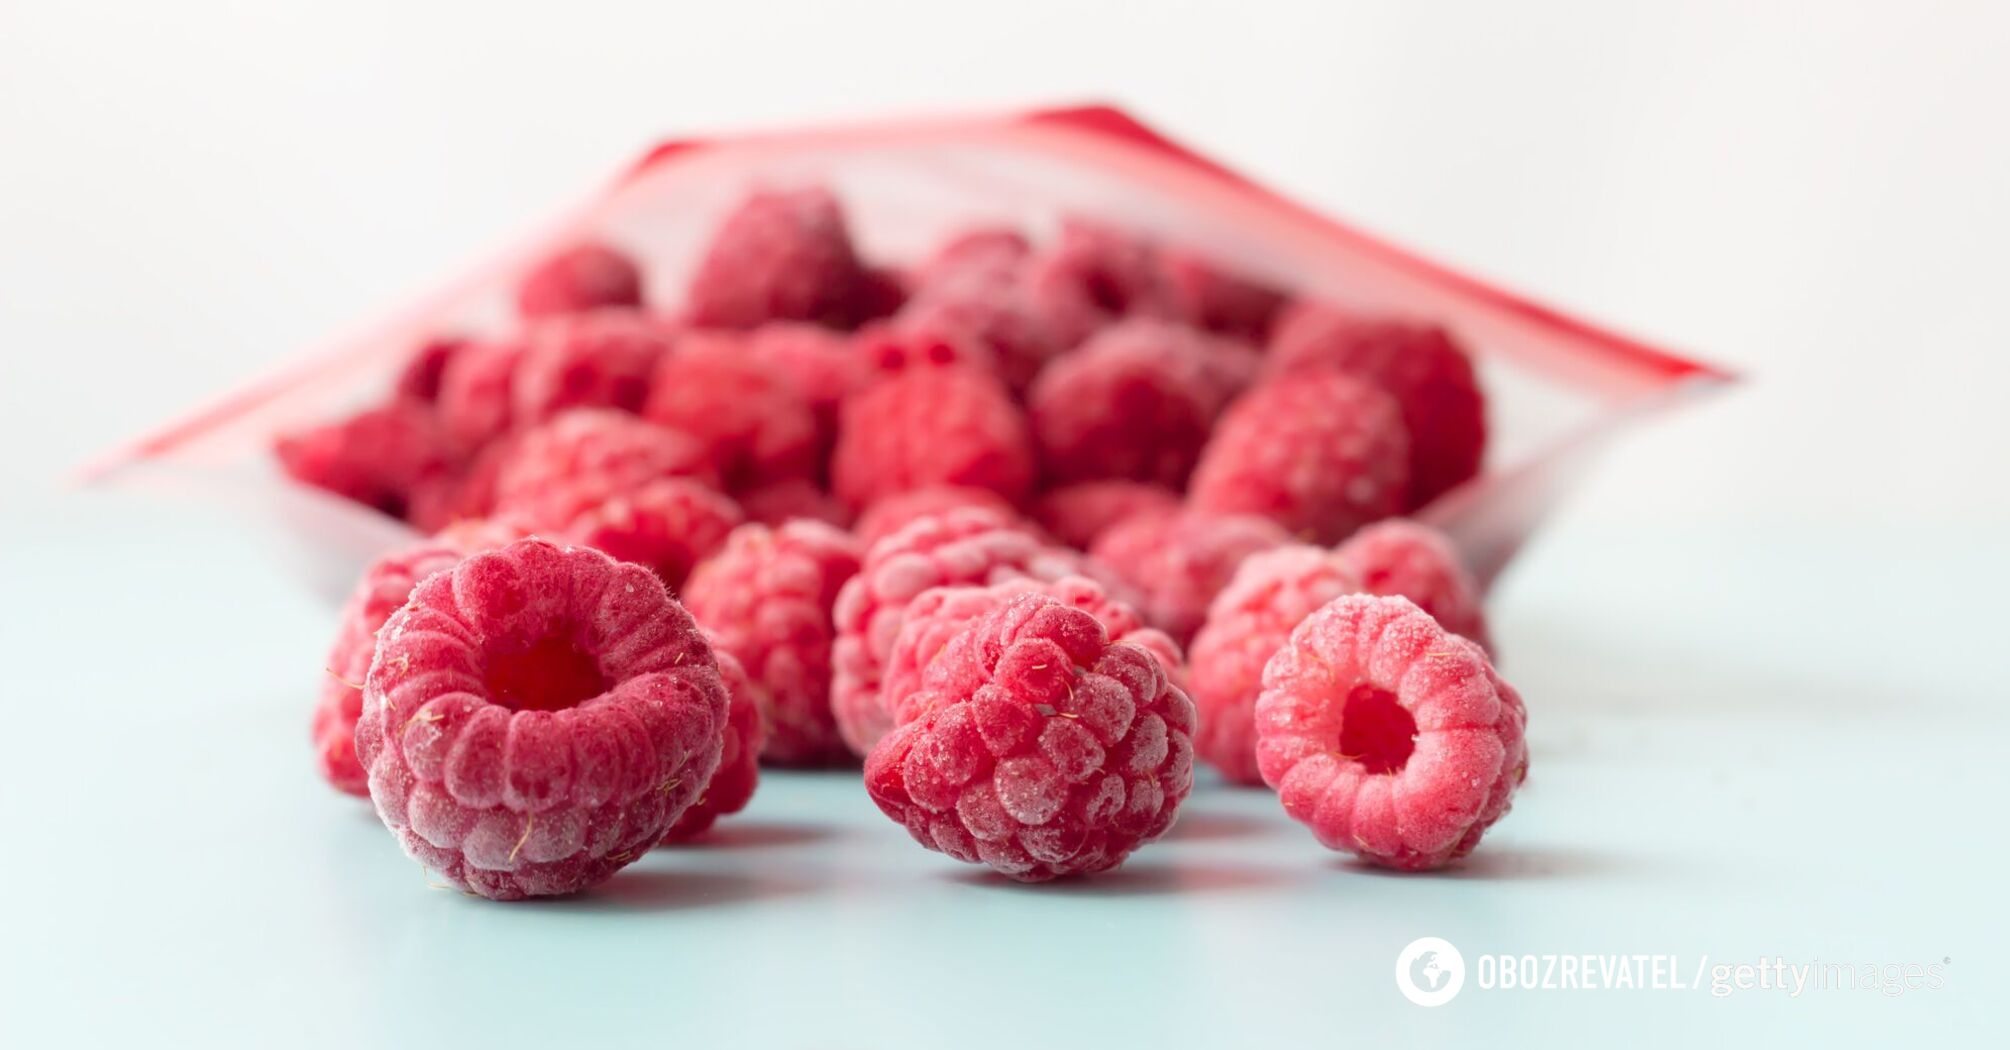 How to freeze berries correctly